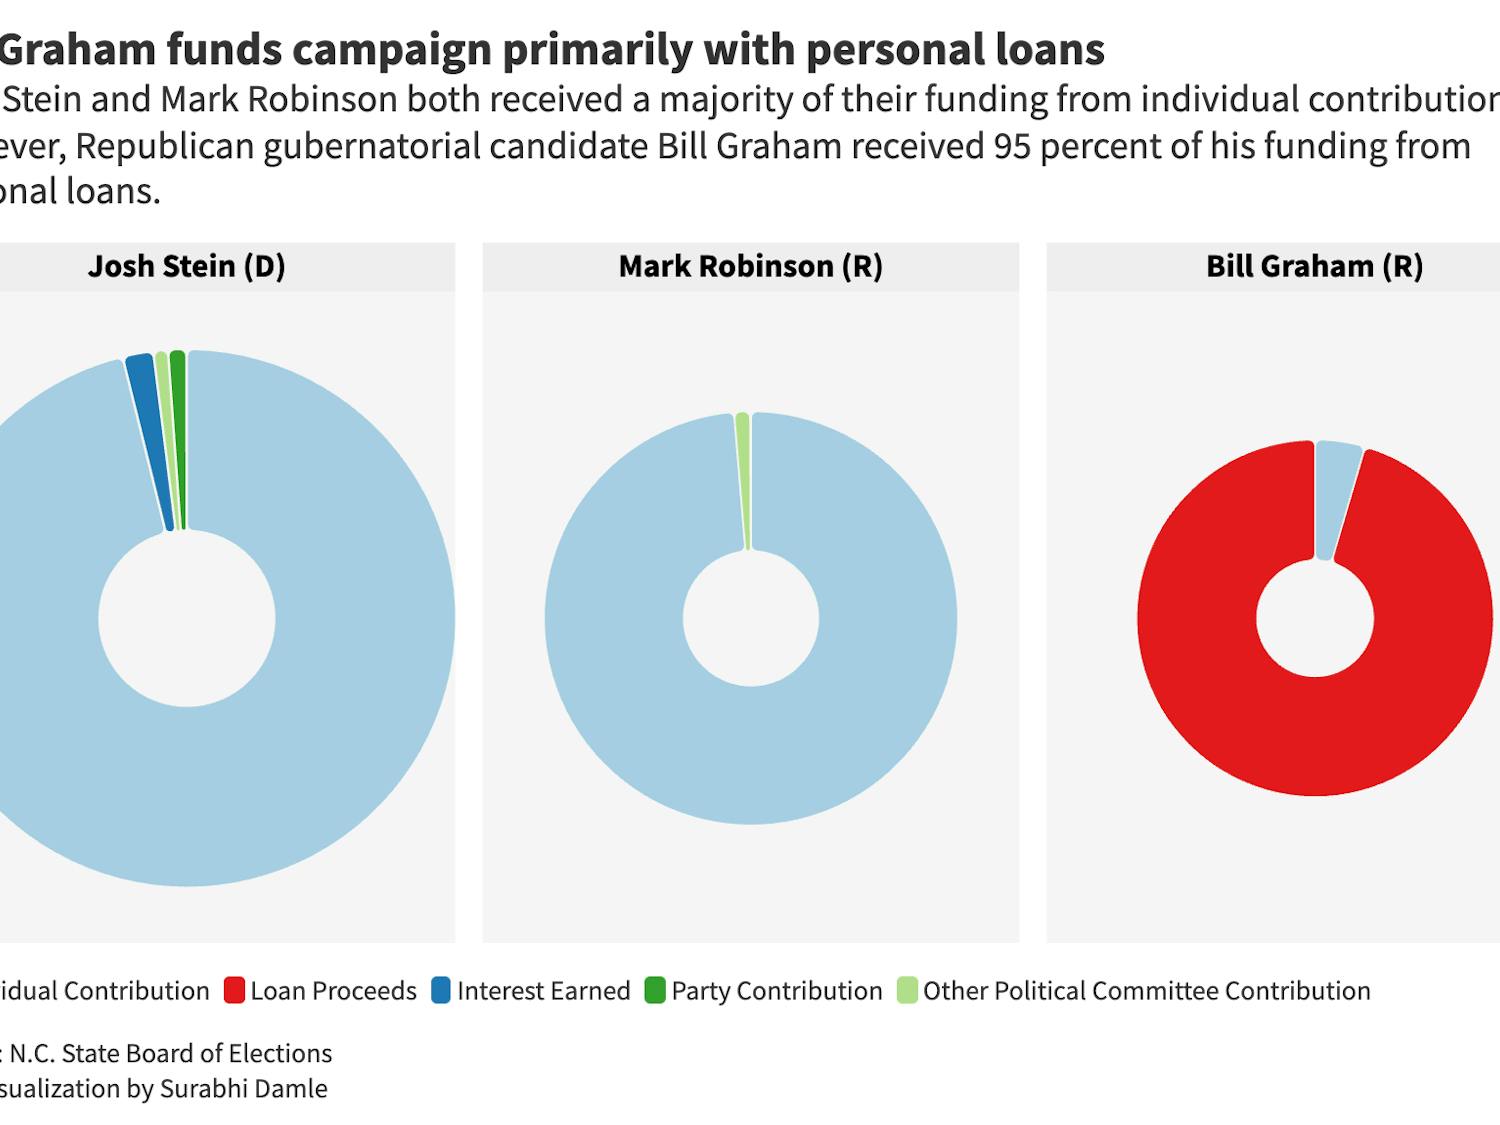 Visualization: Bill Graham funds campaign primarily with personal loans